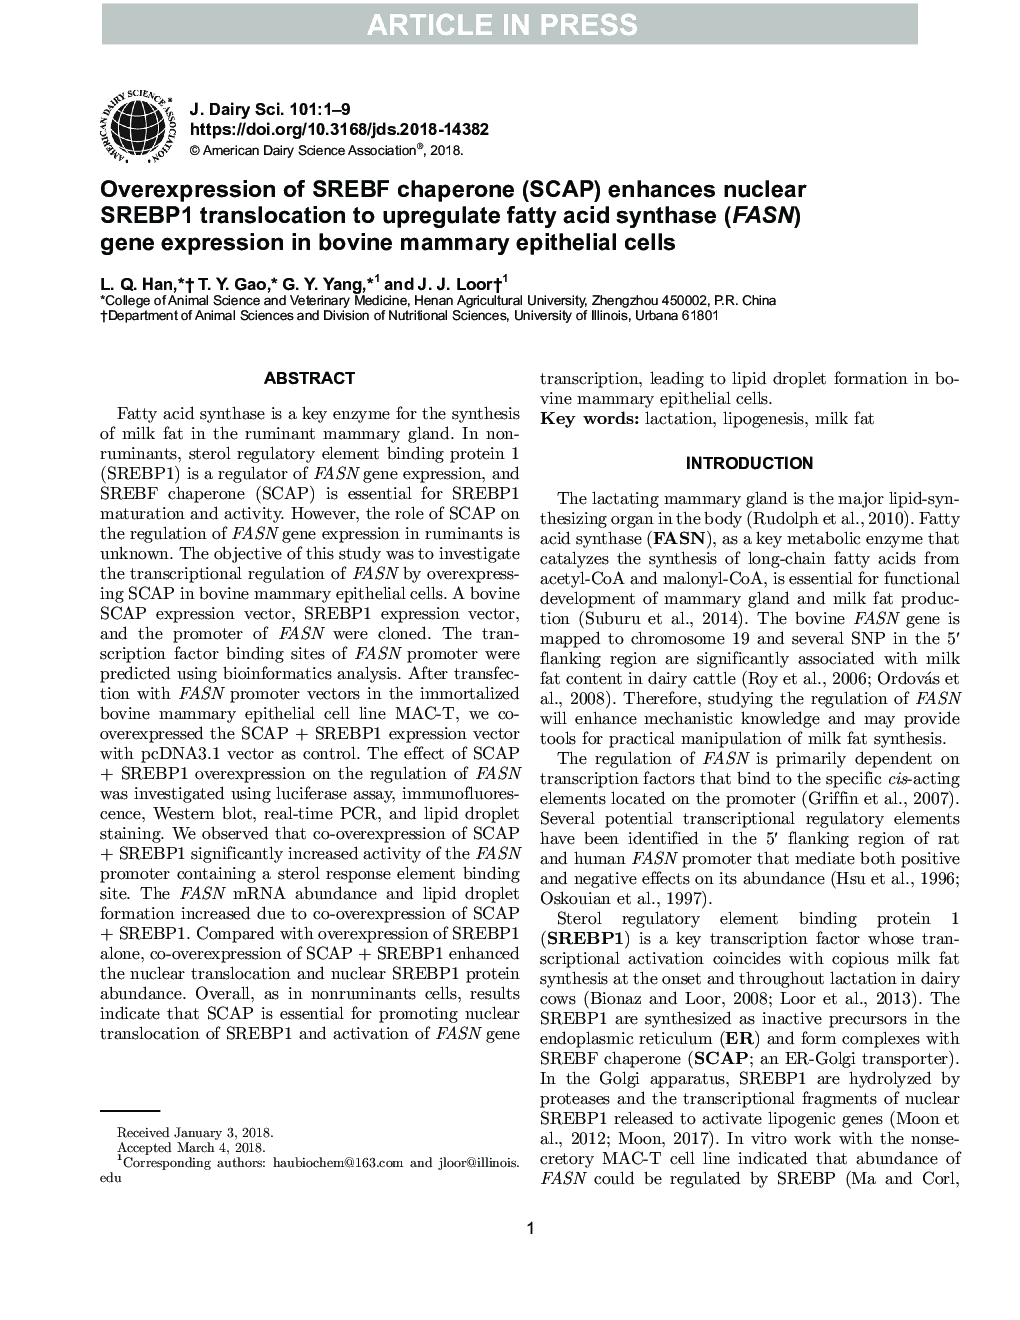 Overexpression of SREBF chaperone (SCAP) enhances nuclear SREBP1 translocation to upregulate fatty acid synthase (FASN) gene expression in bovine mammary epithelial cells